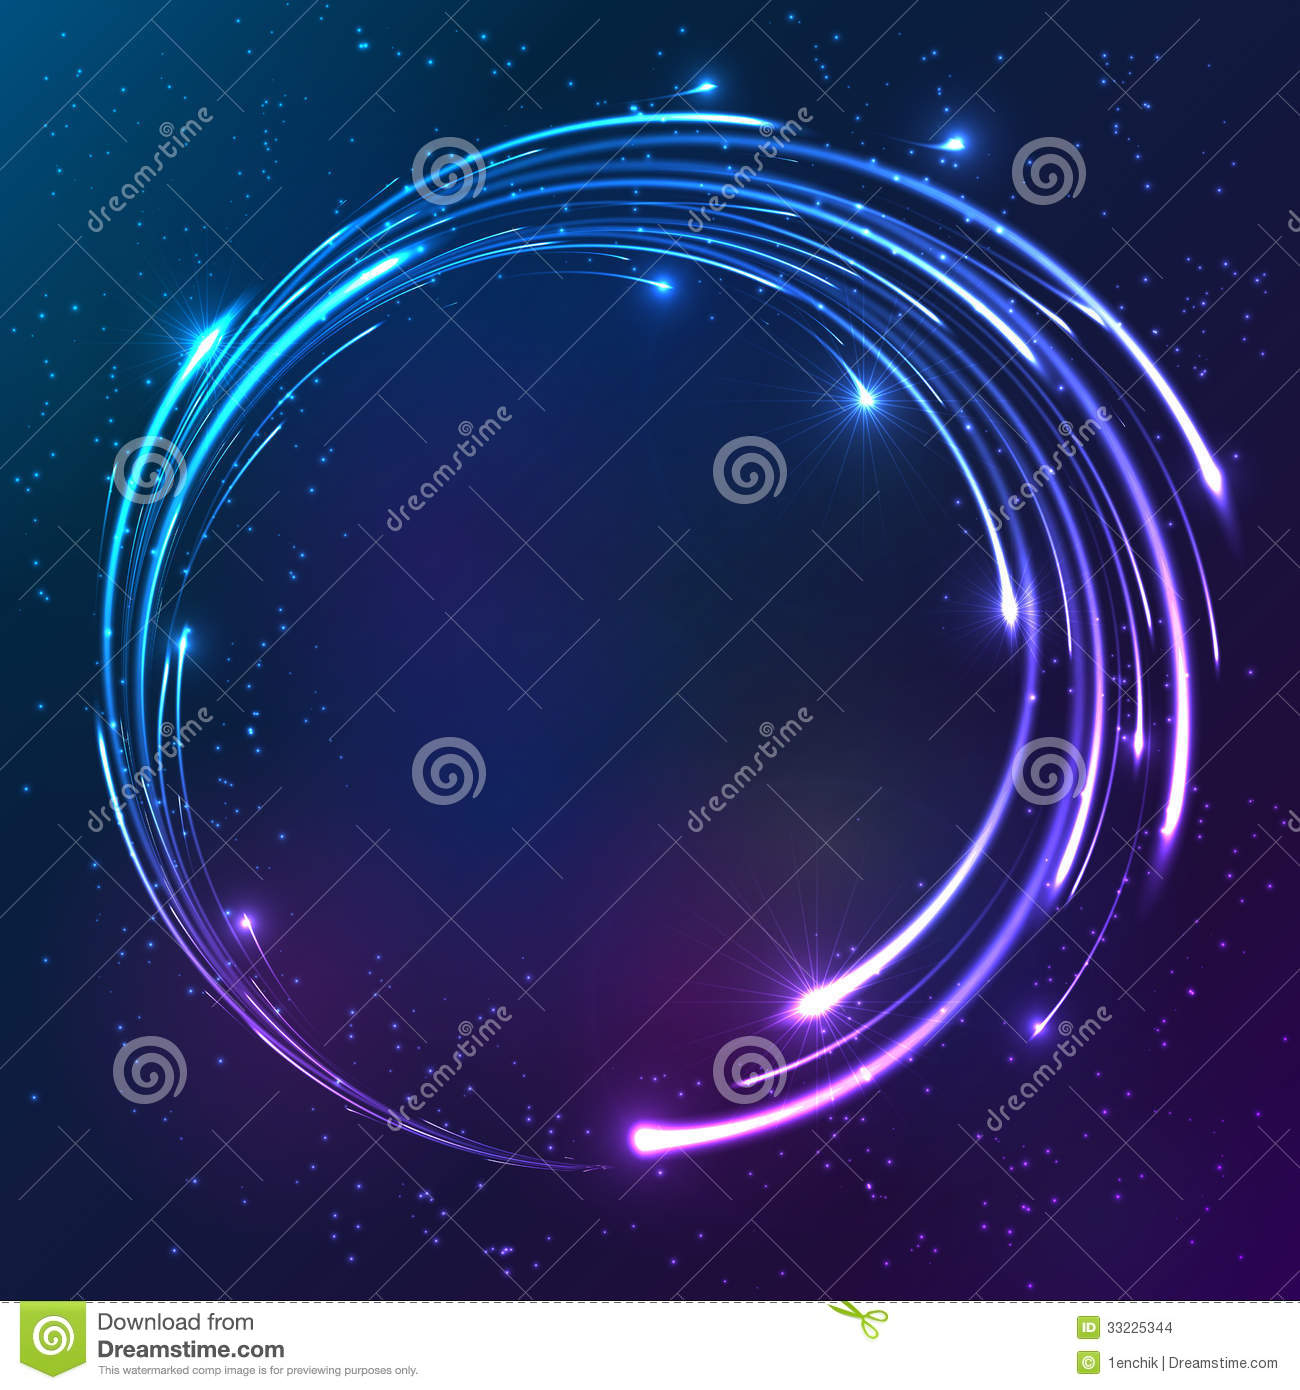 Bright Shining Neon Lights Circle Background Stock Images   Image